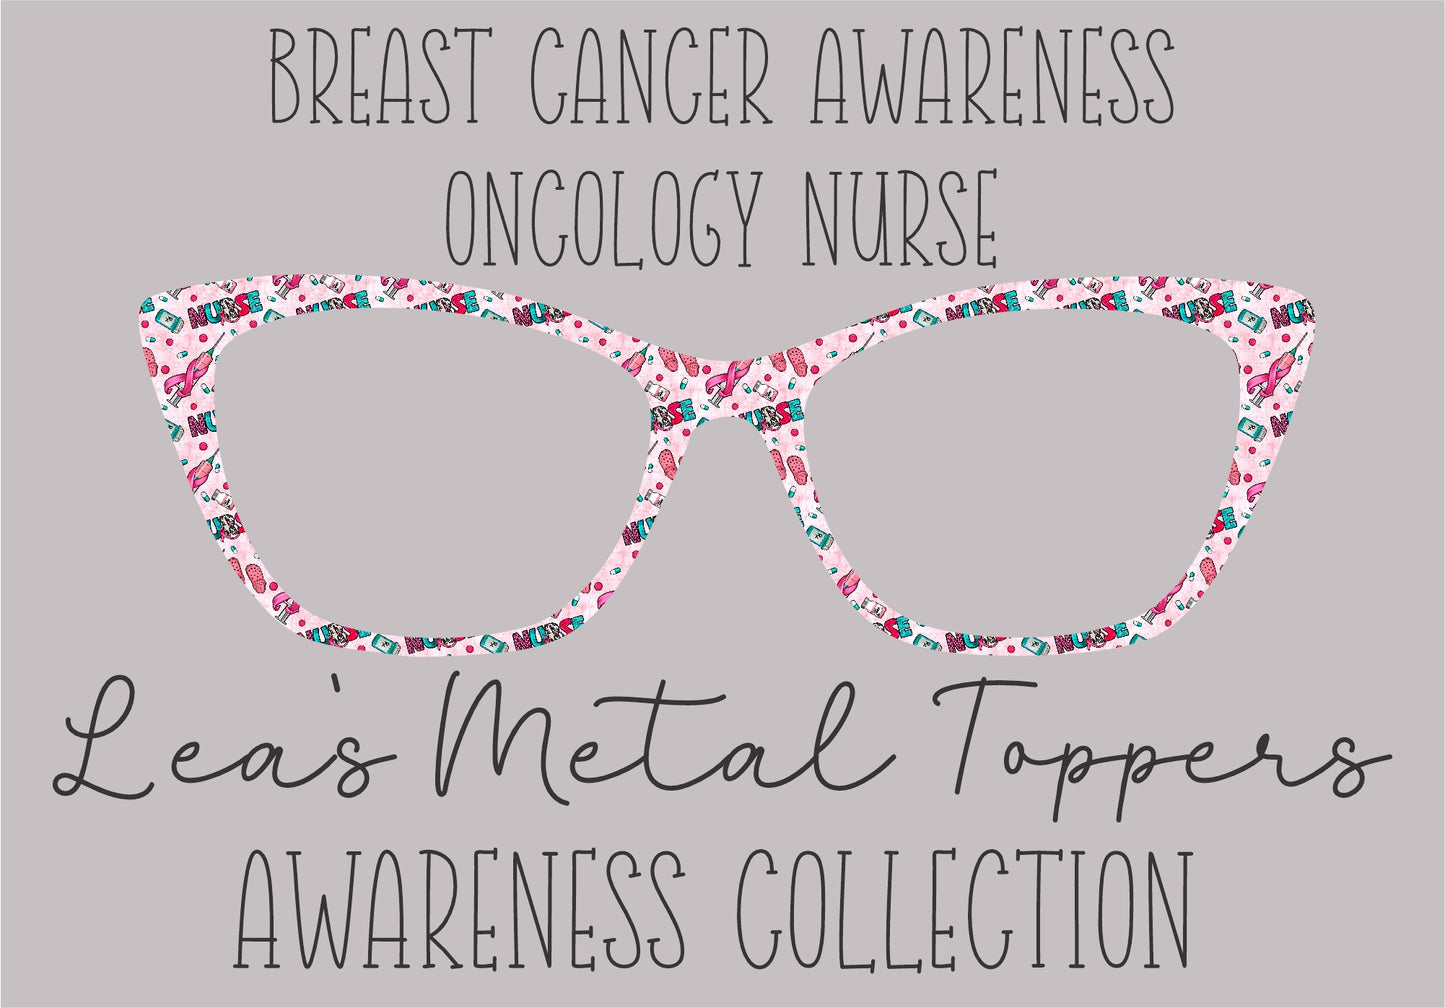 BREAST CANCER AWARENESS ONCOLOGY NURSE Eyewear Frame Toppers COMES WITH MAGNETS